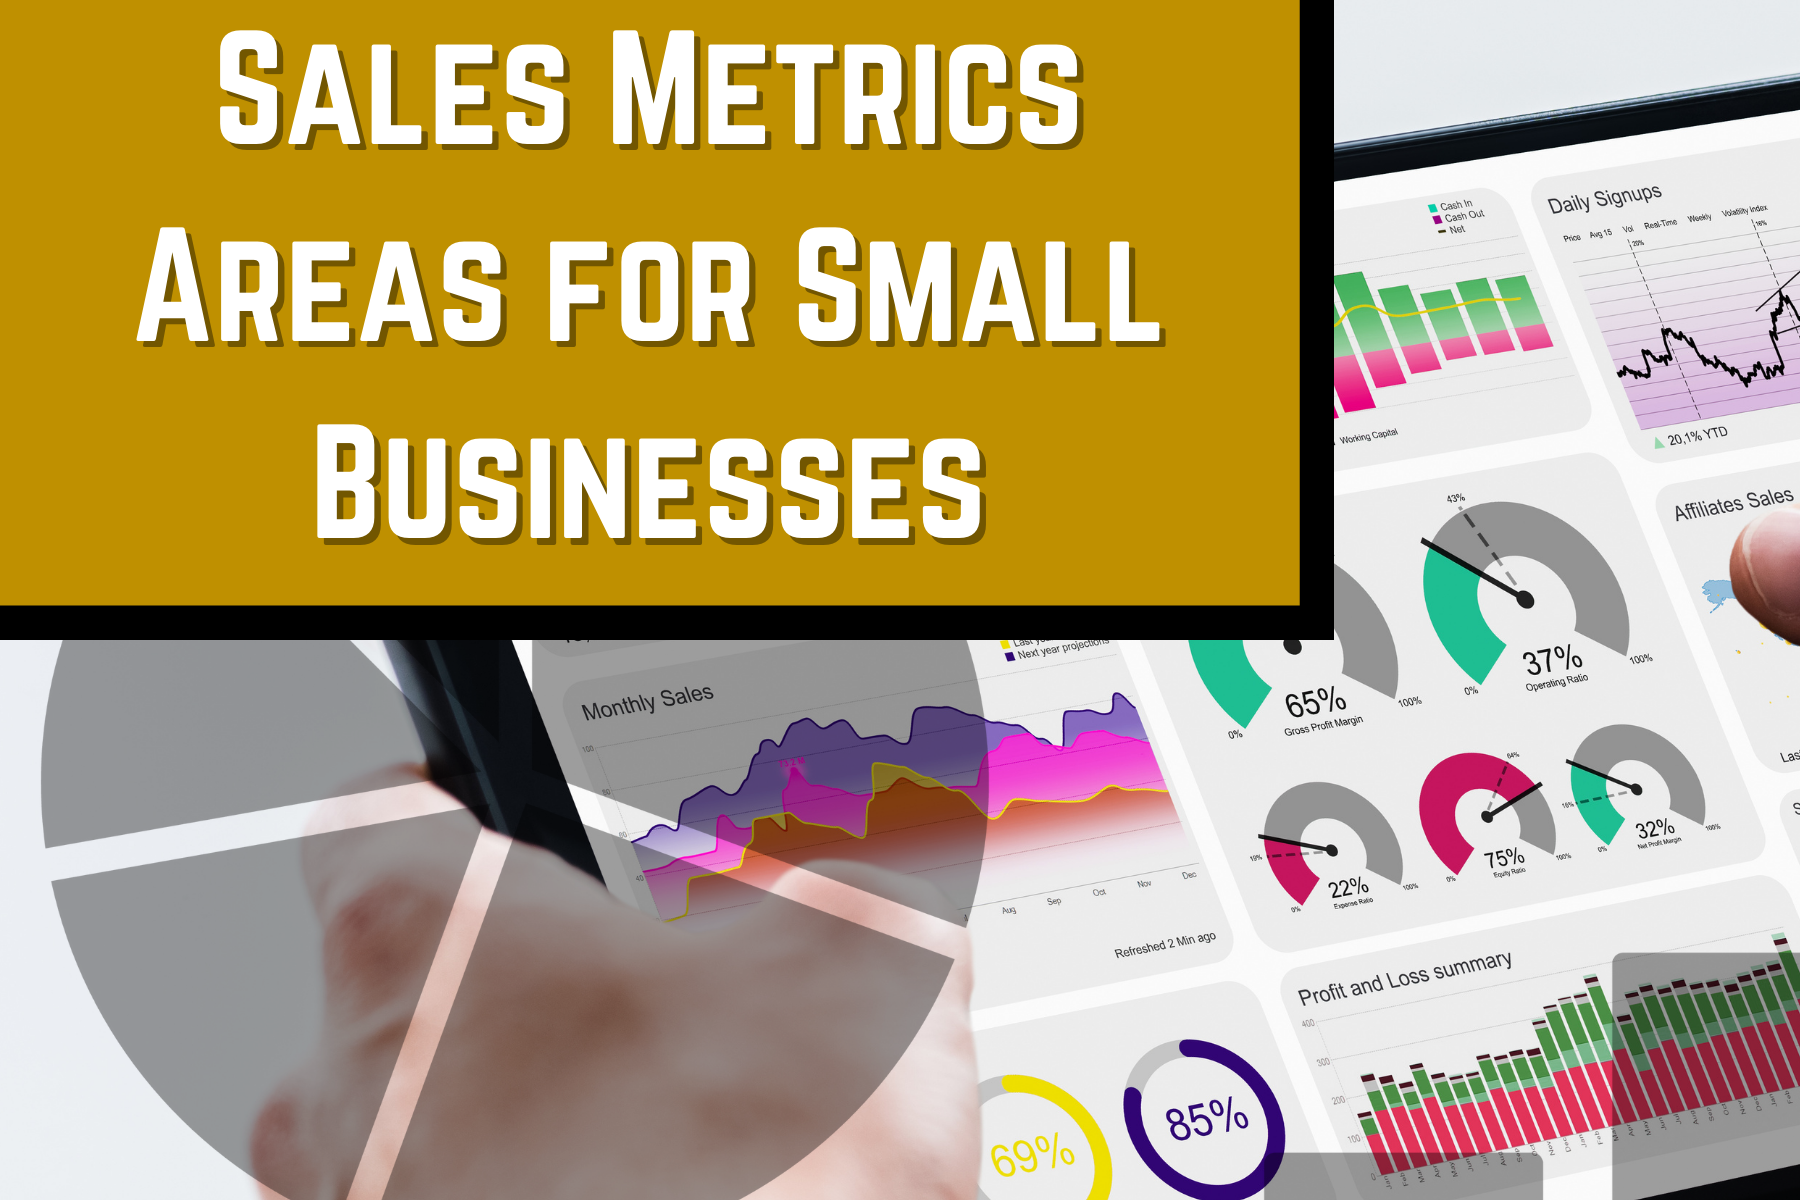 3 Key Sales Metrics Areas for Small Businesses Plus a Sample Daily Dashboard